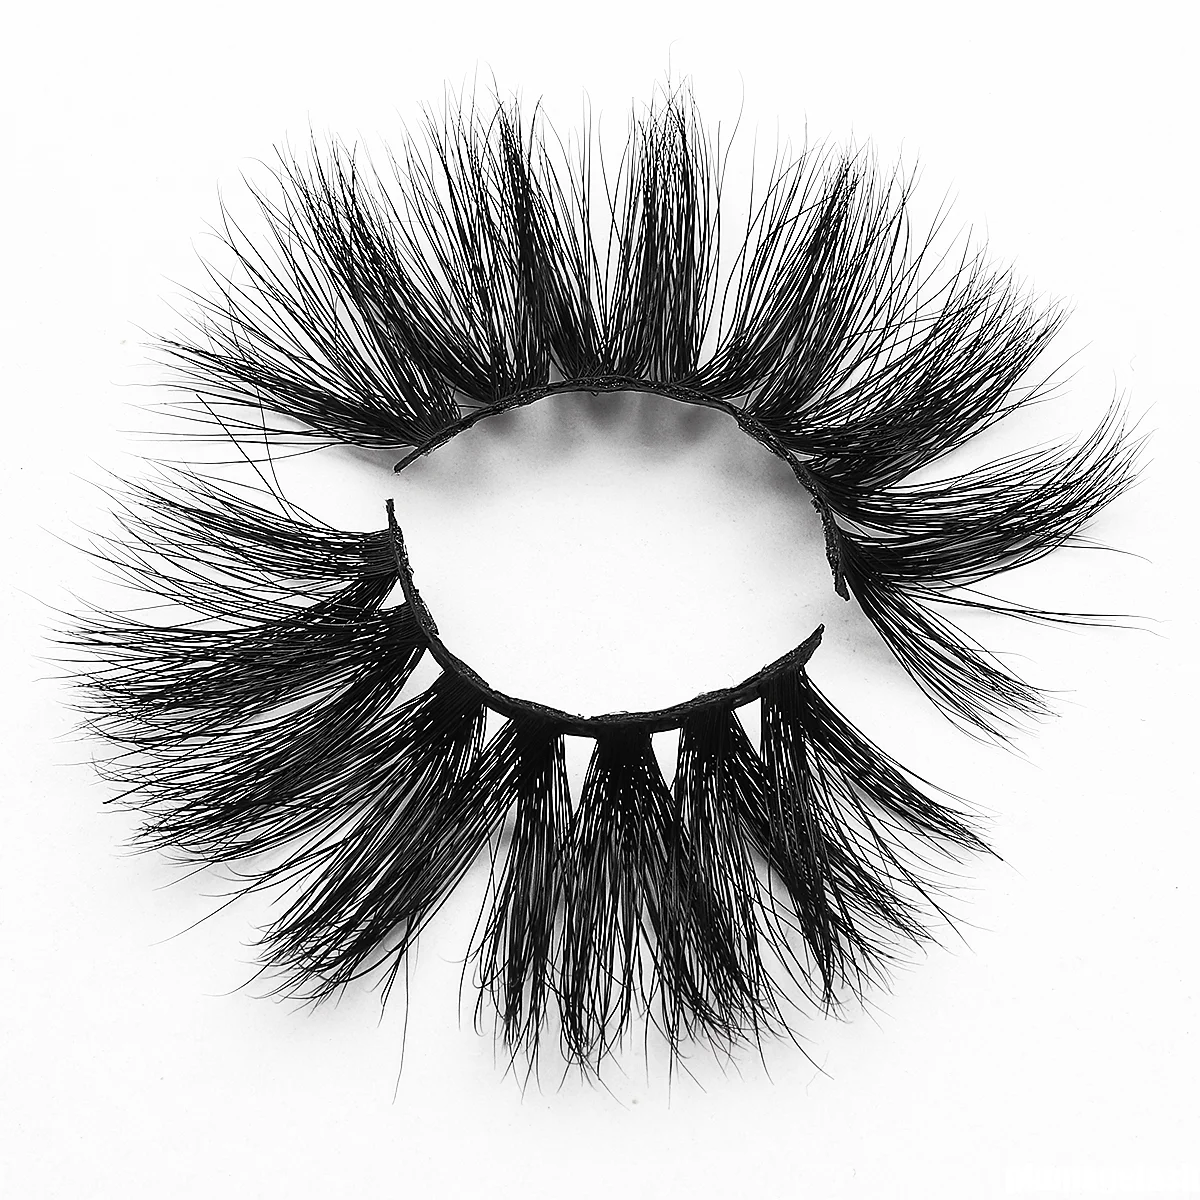 5D mink lashes are made of real mink fur